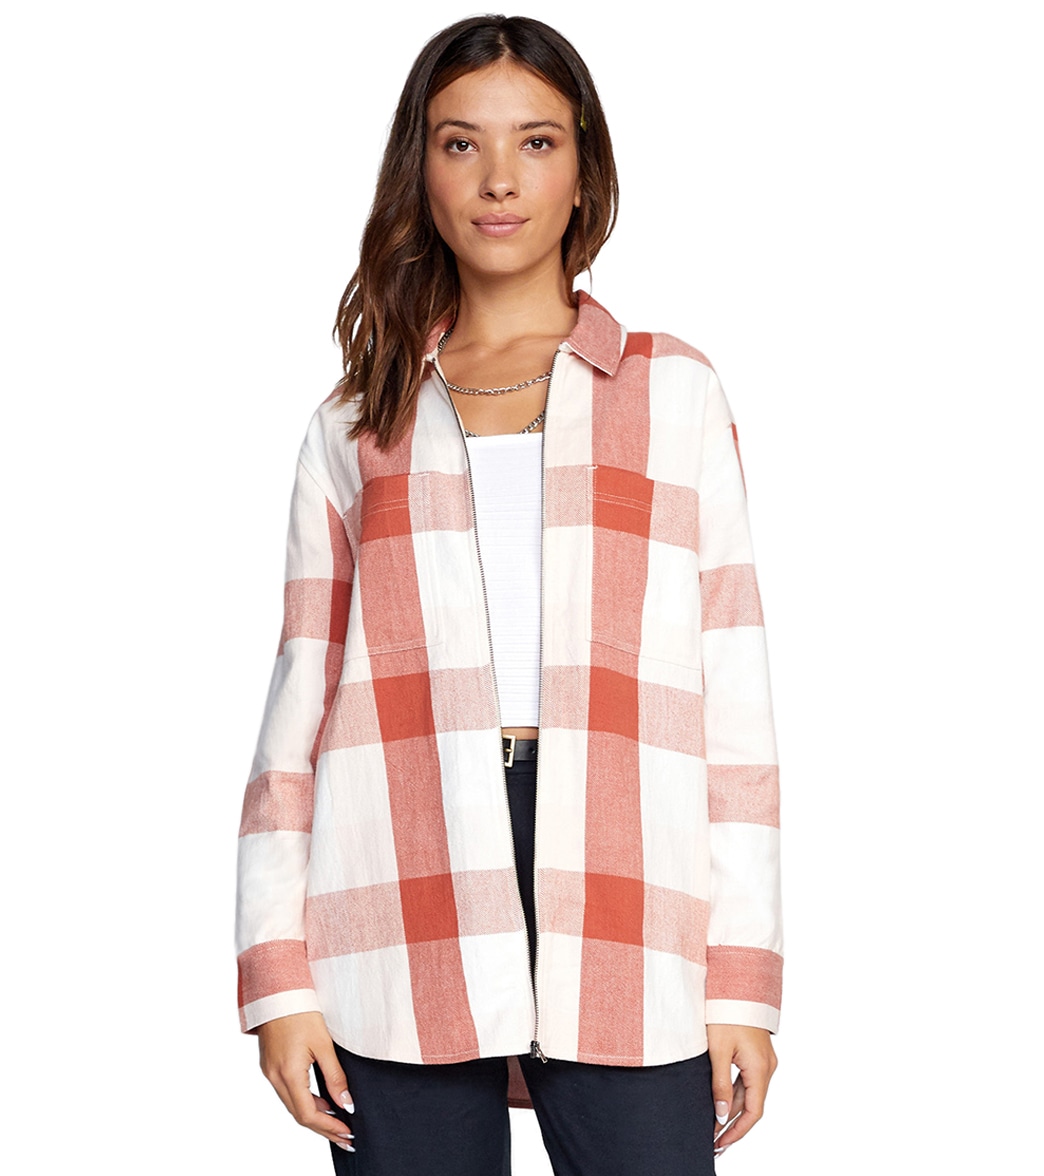 Rvca Women's Decades Zip Flannel Top - Dusty Red Large - Swimoutlet.com